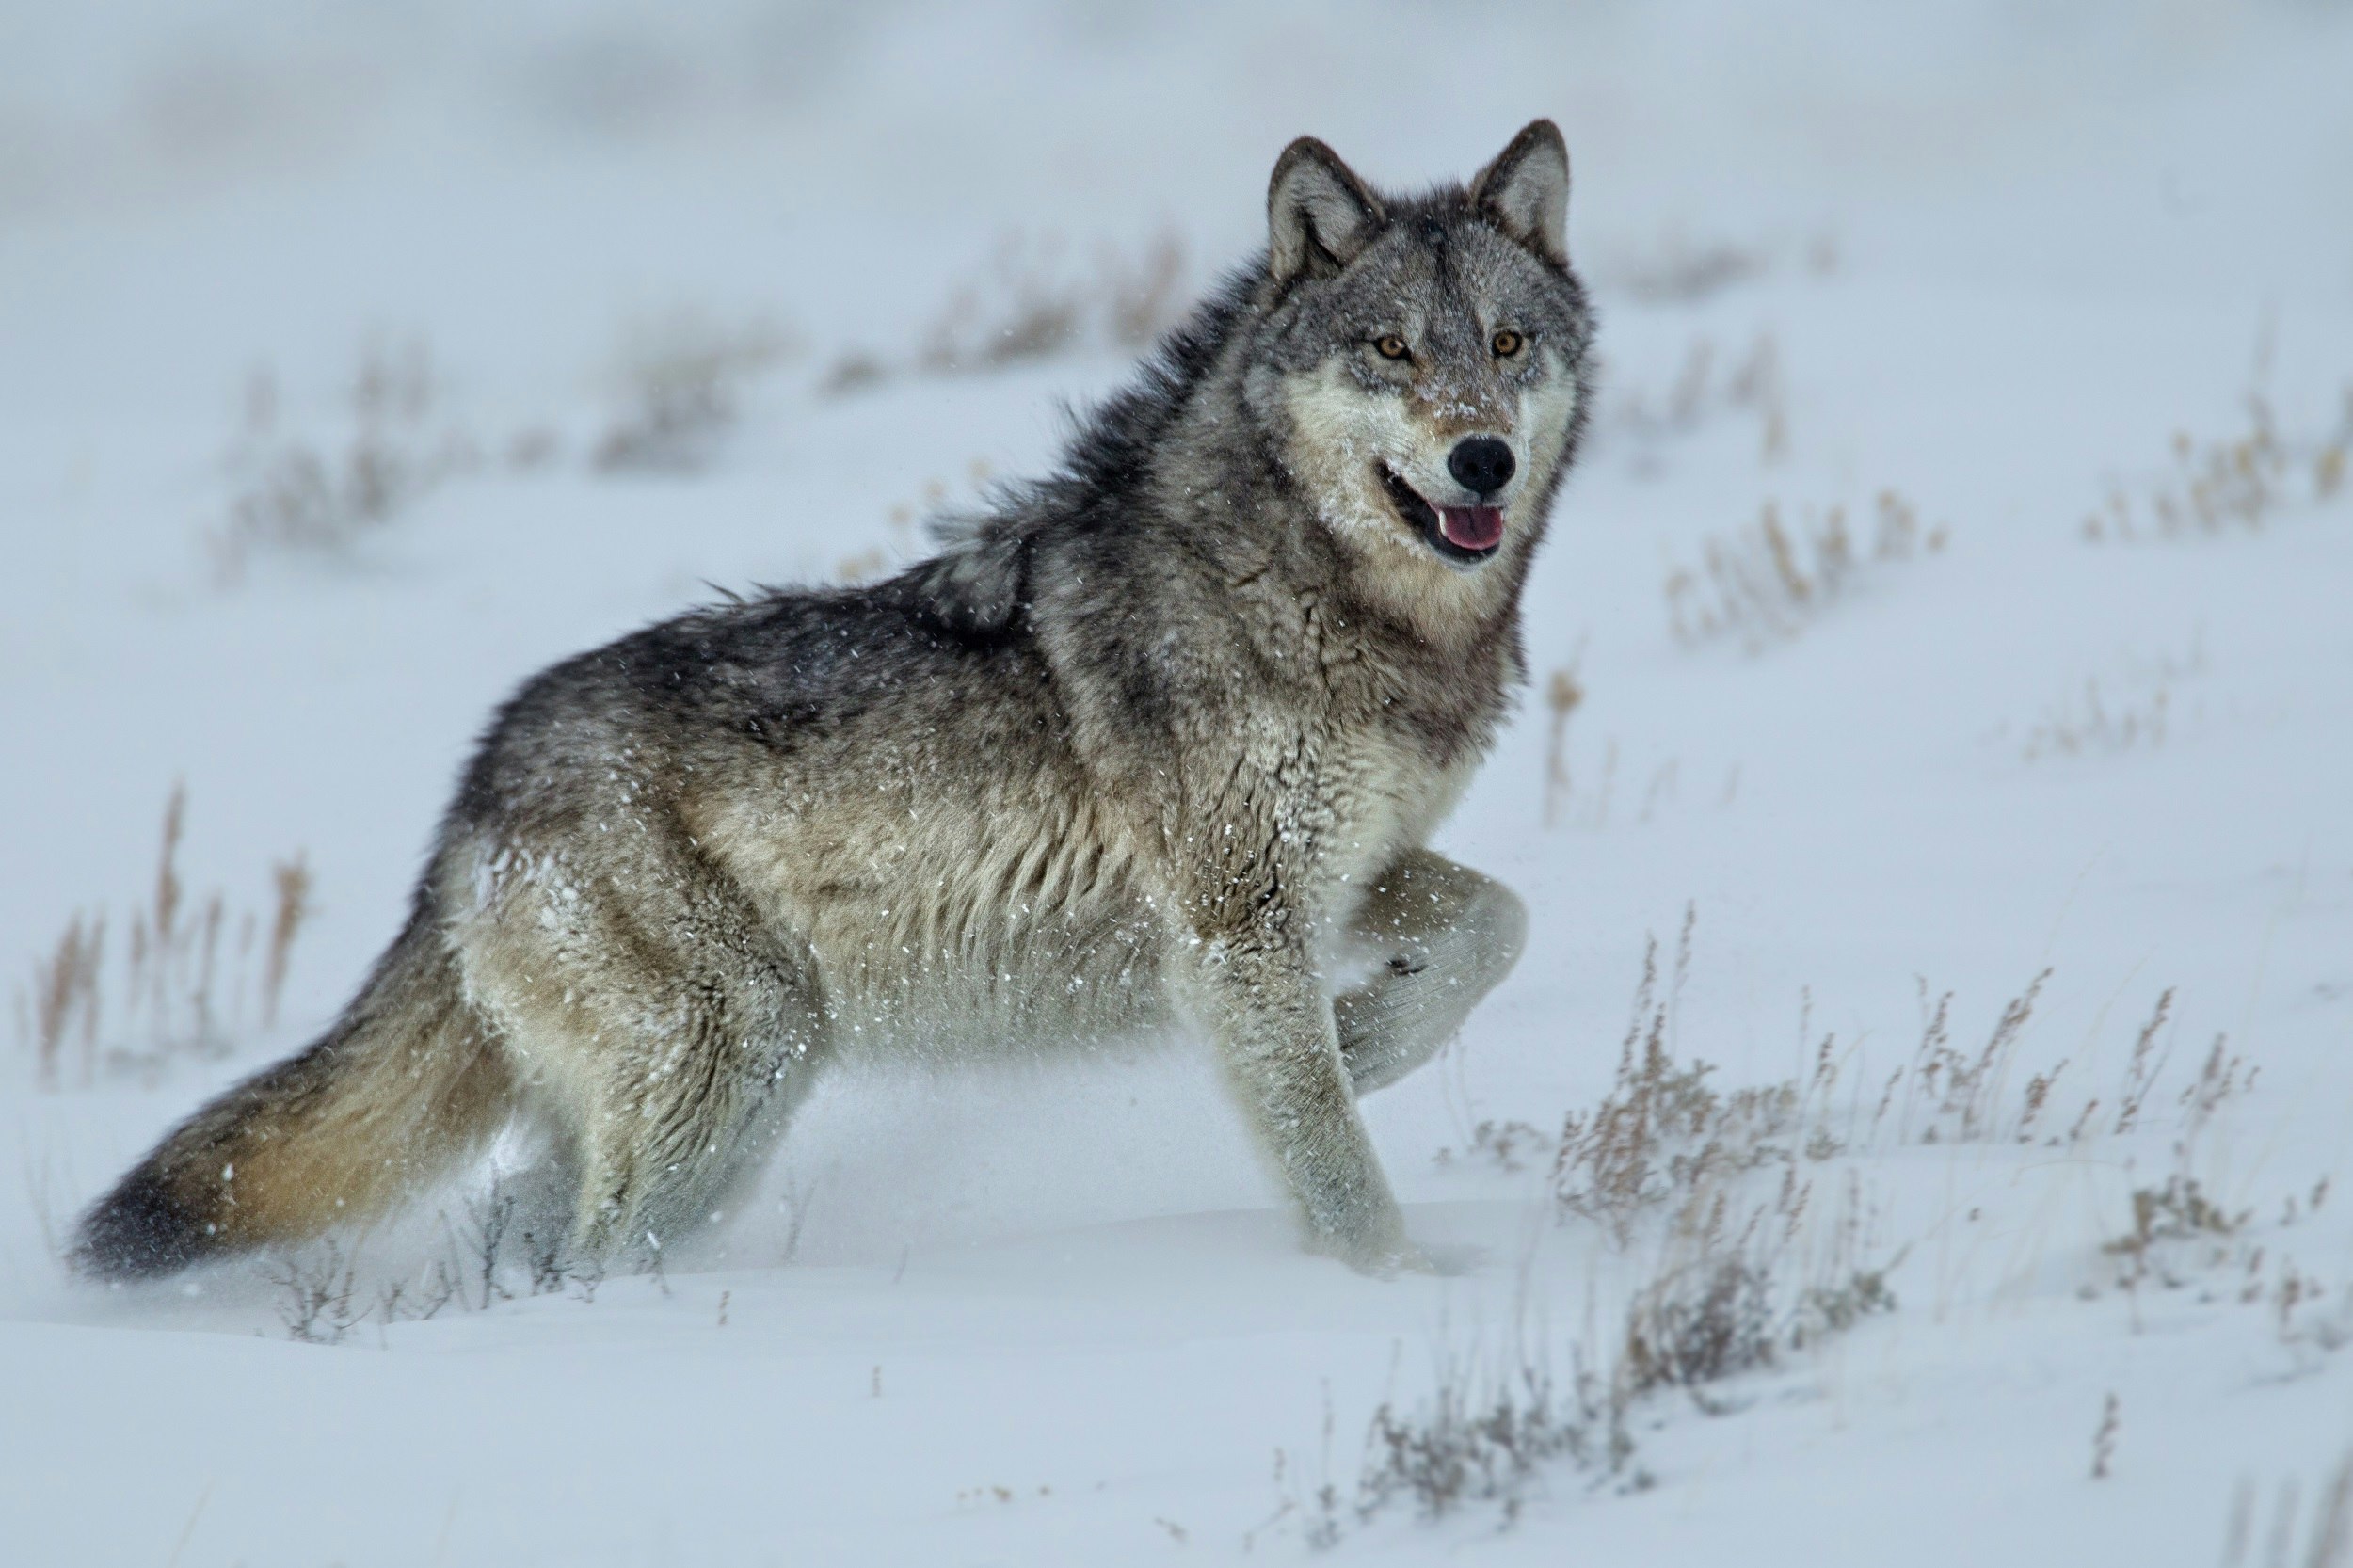 A wolf stands in the snow. It's upper body is dark gray, while the lower parts are paler, almost white in colour